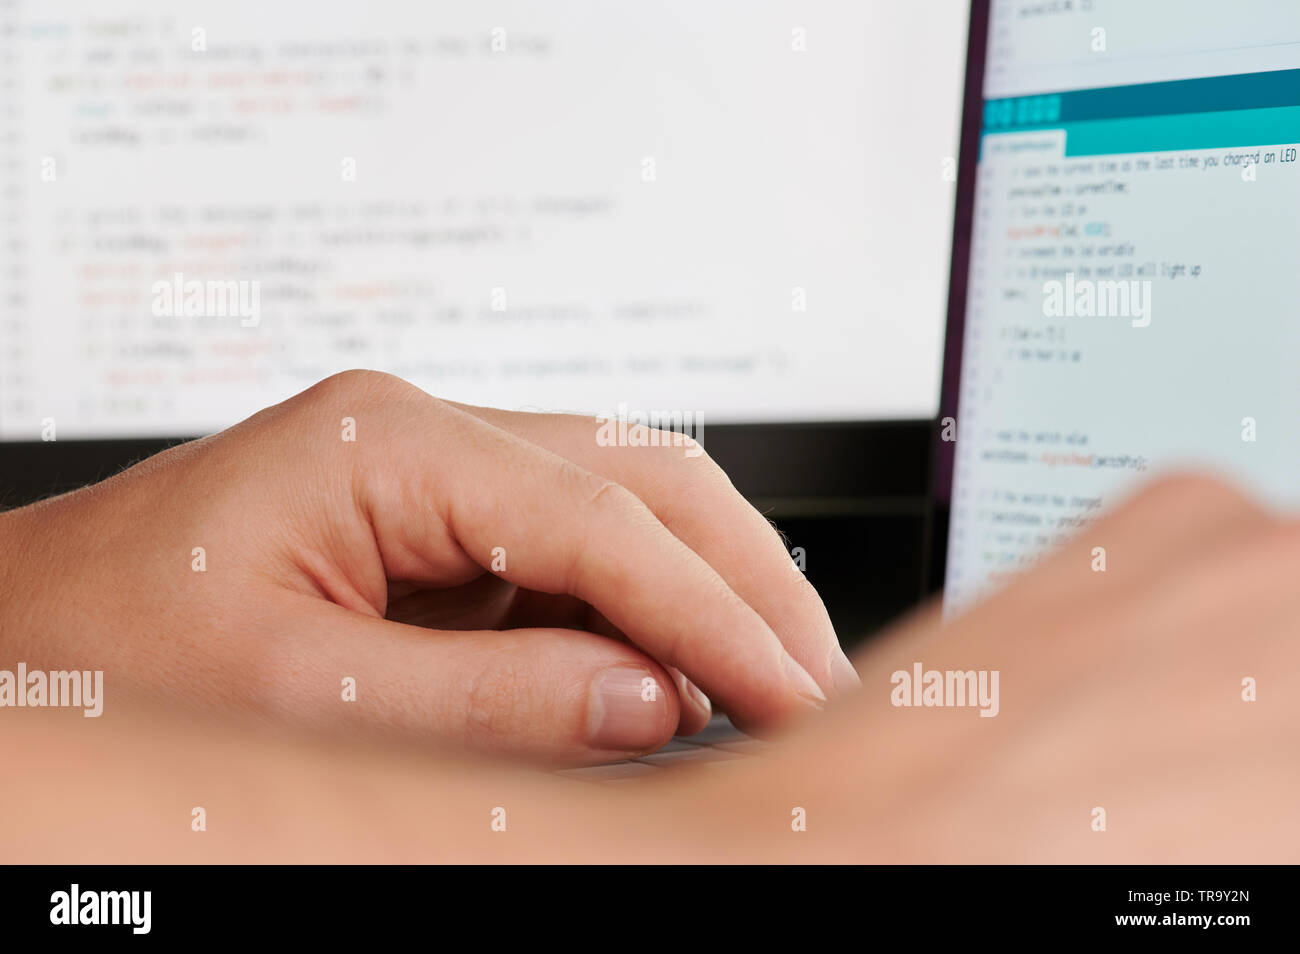 Programmer hands on blurred code background close up view Stock Photo